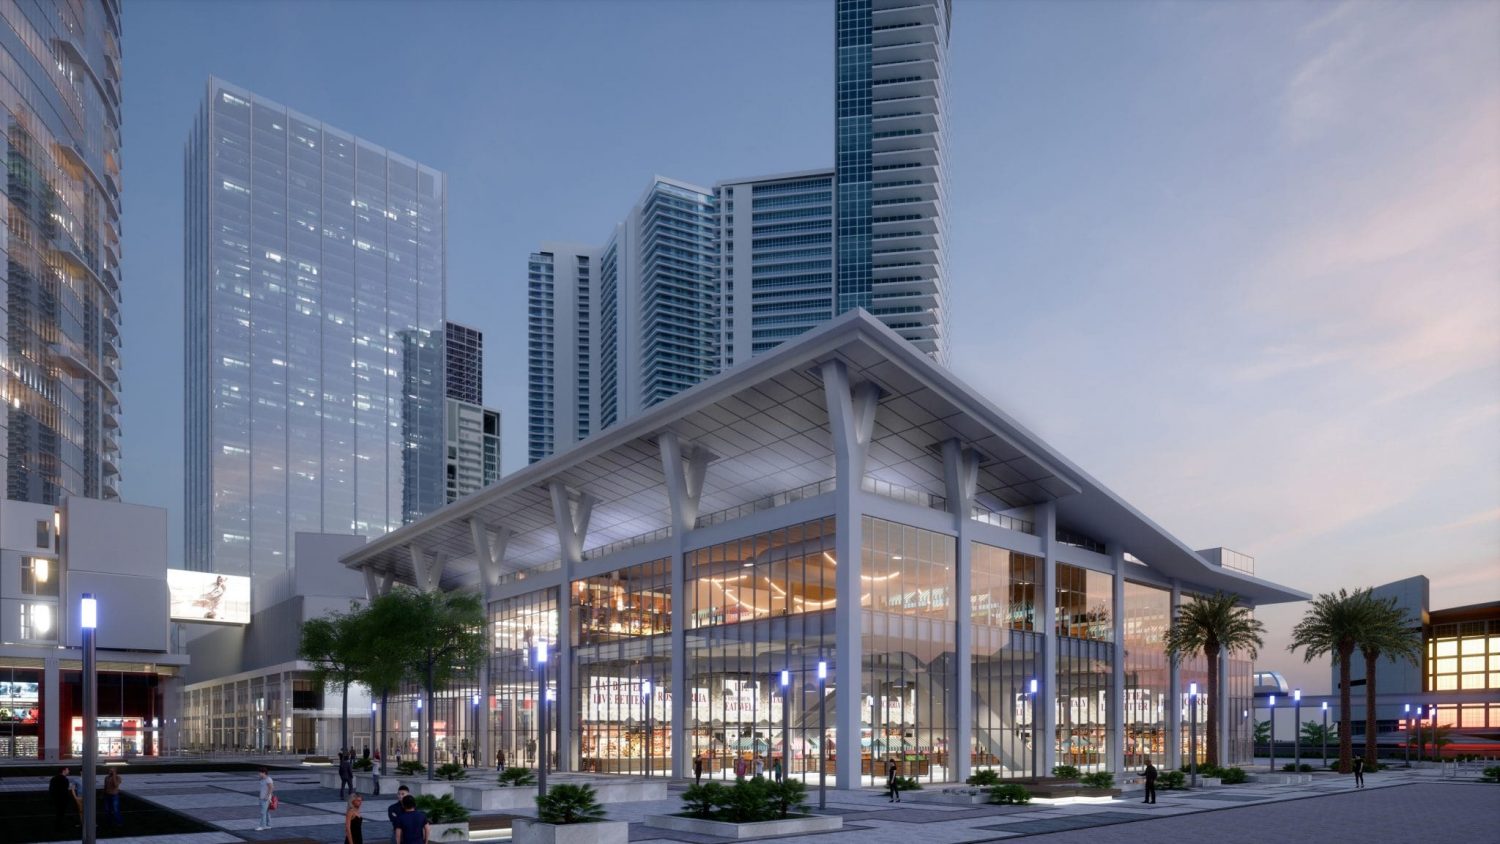 Miami Worldcenter Block-F West. Designed by NBWW Architects.